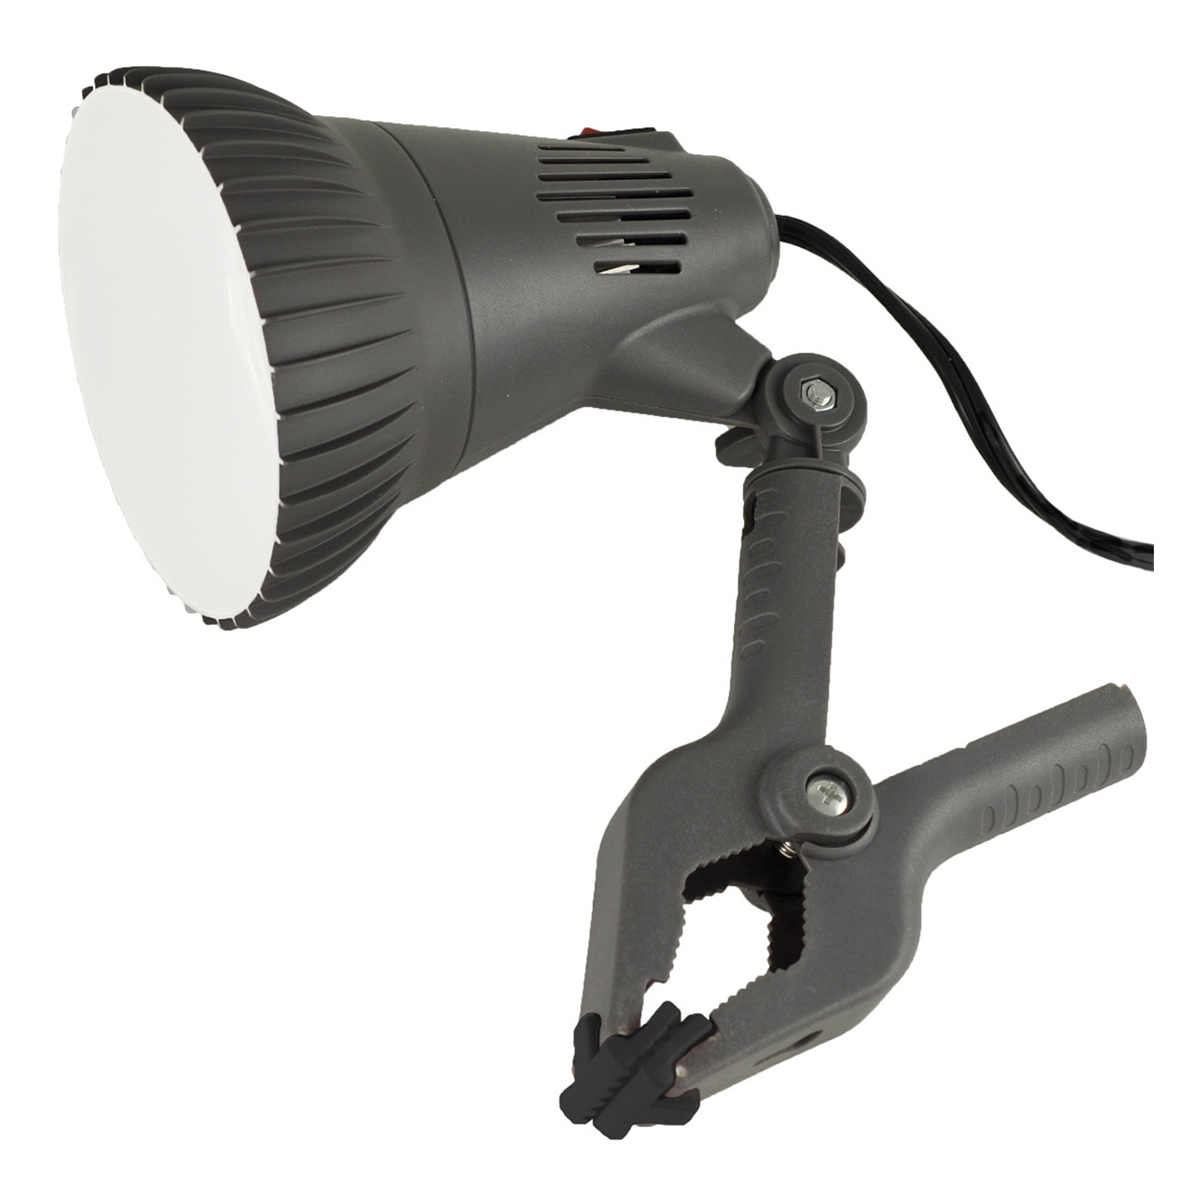 PowerZone O-CLN-1000 Clamp Light, Plug-in, LED Lamp, Gray